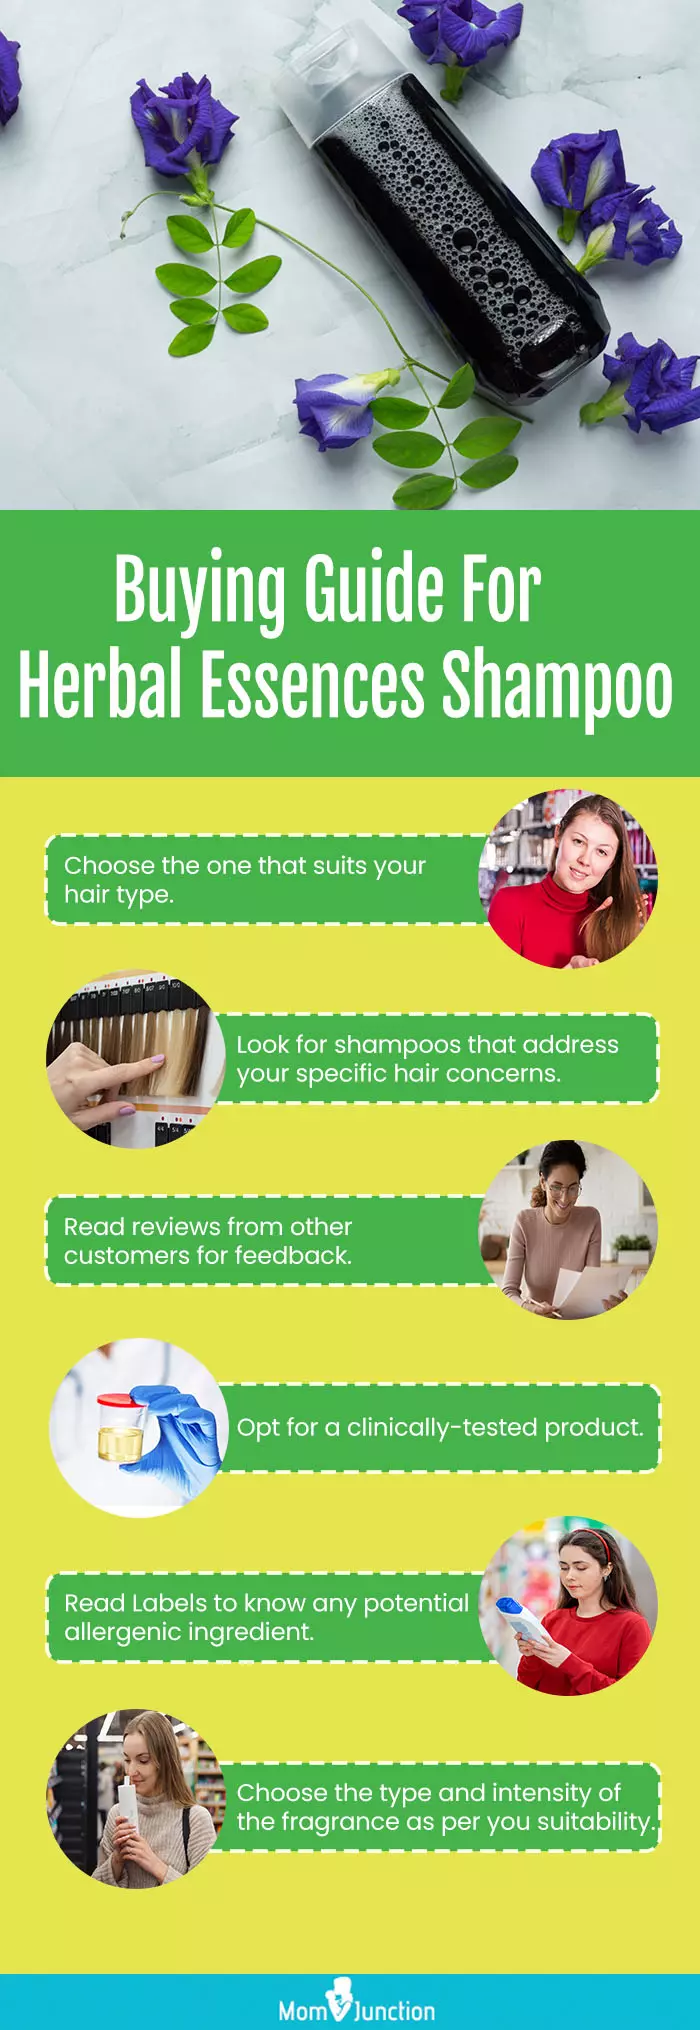 Buying Guide For Herbal Essences Shampoo (infographic)